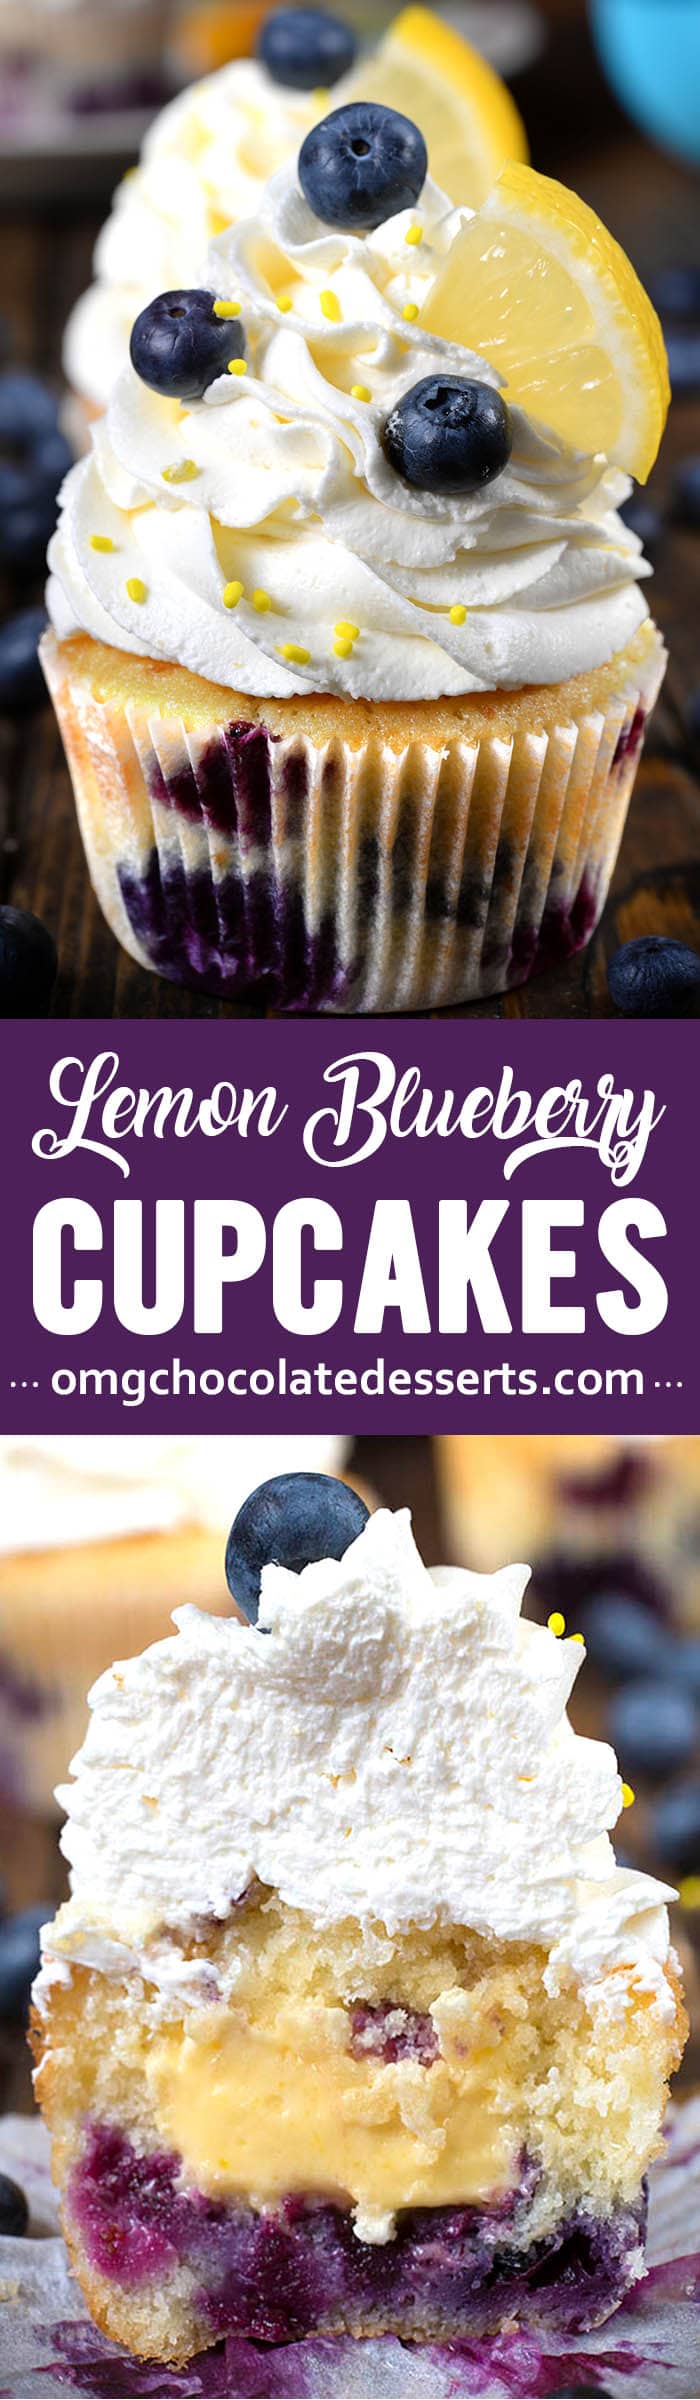 These Lemon Blueberry Cupcakes are bursting with vanilla, fresh blueberries and a hint of lemon in shape of lemon curd filling.